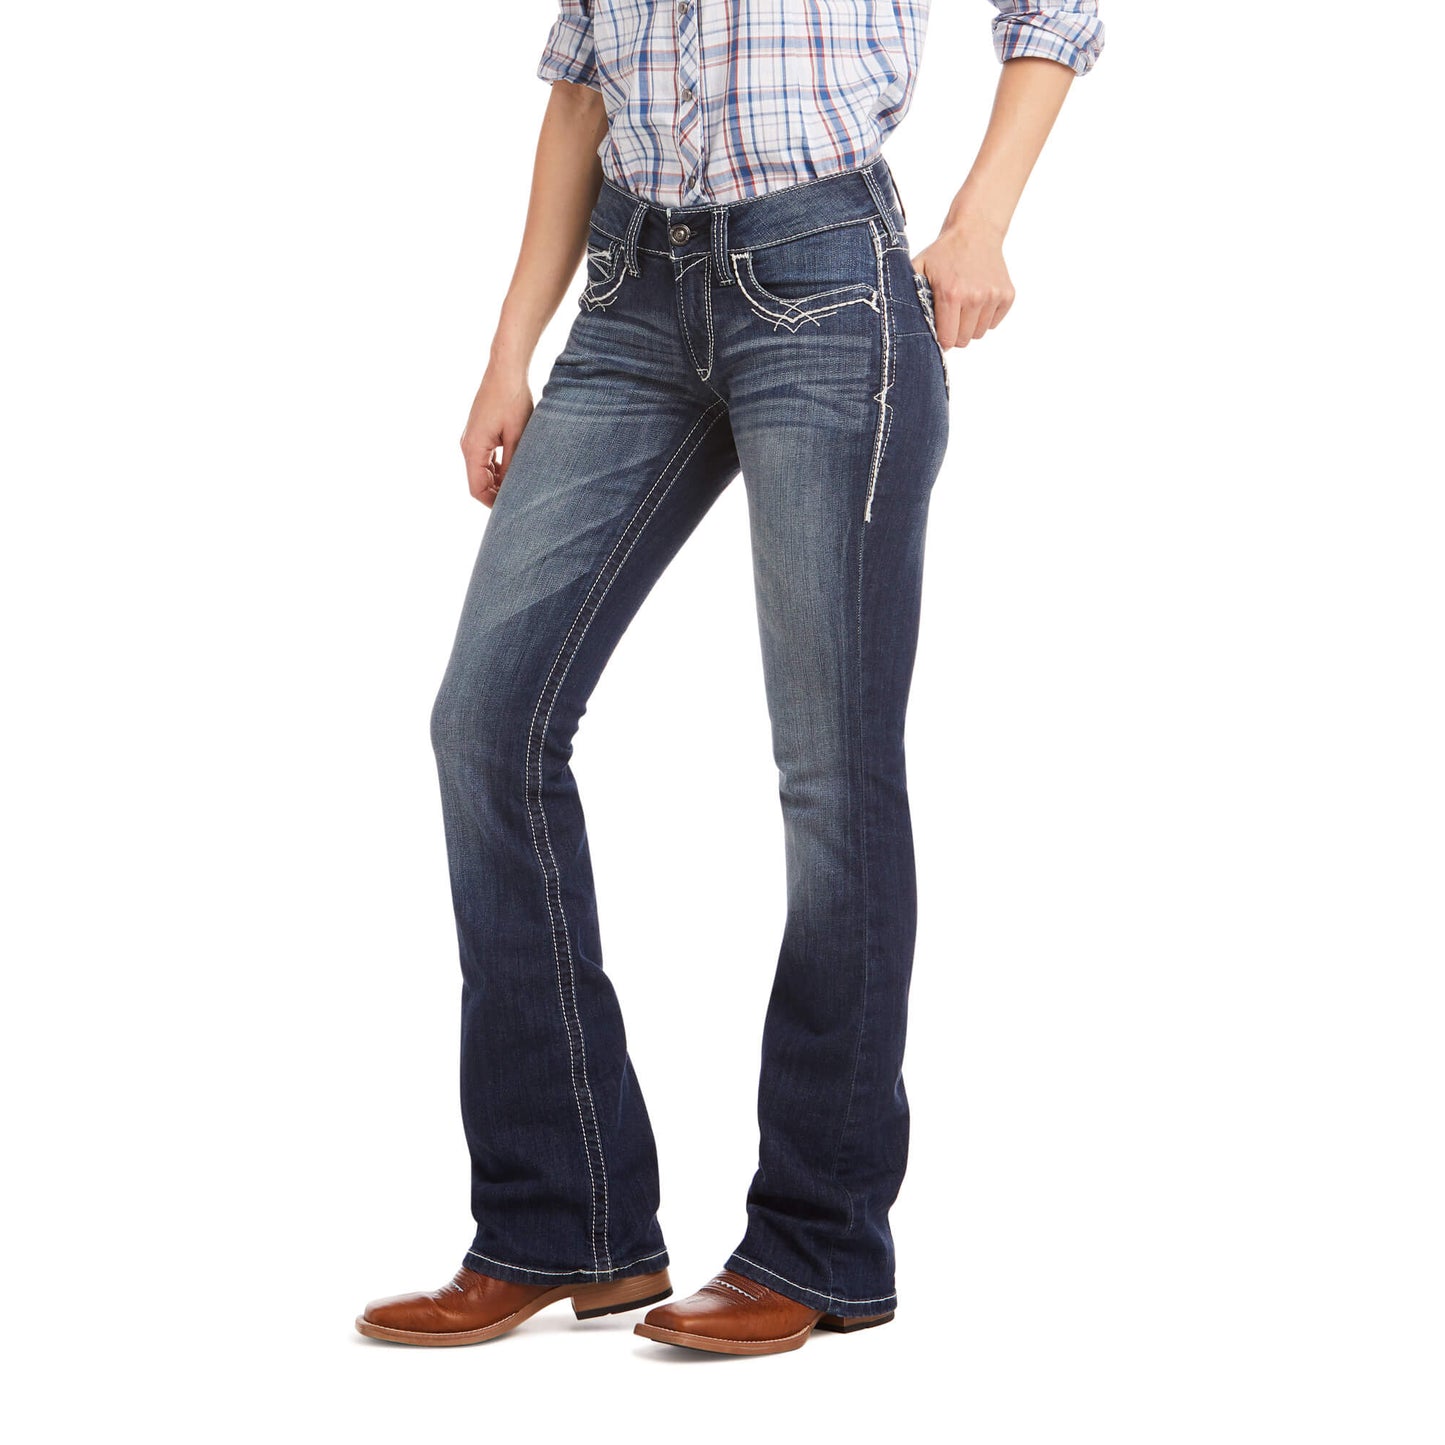 Women's Ariat Style No. 10017510 R.E.A.L. Mid Rise Stretch Entwined Boot Cut Jean